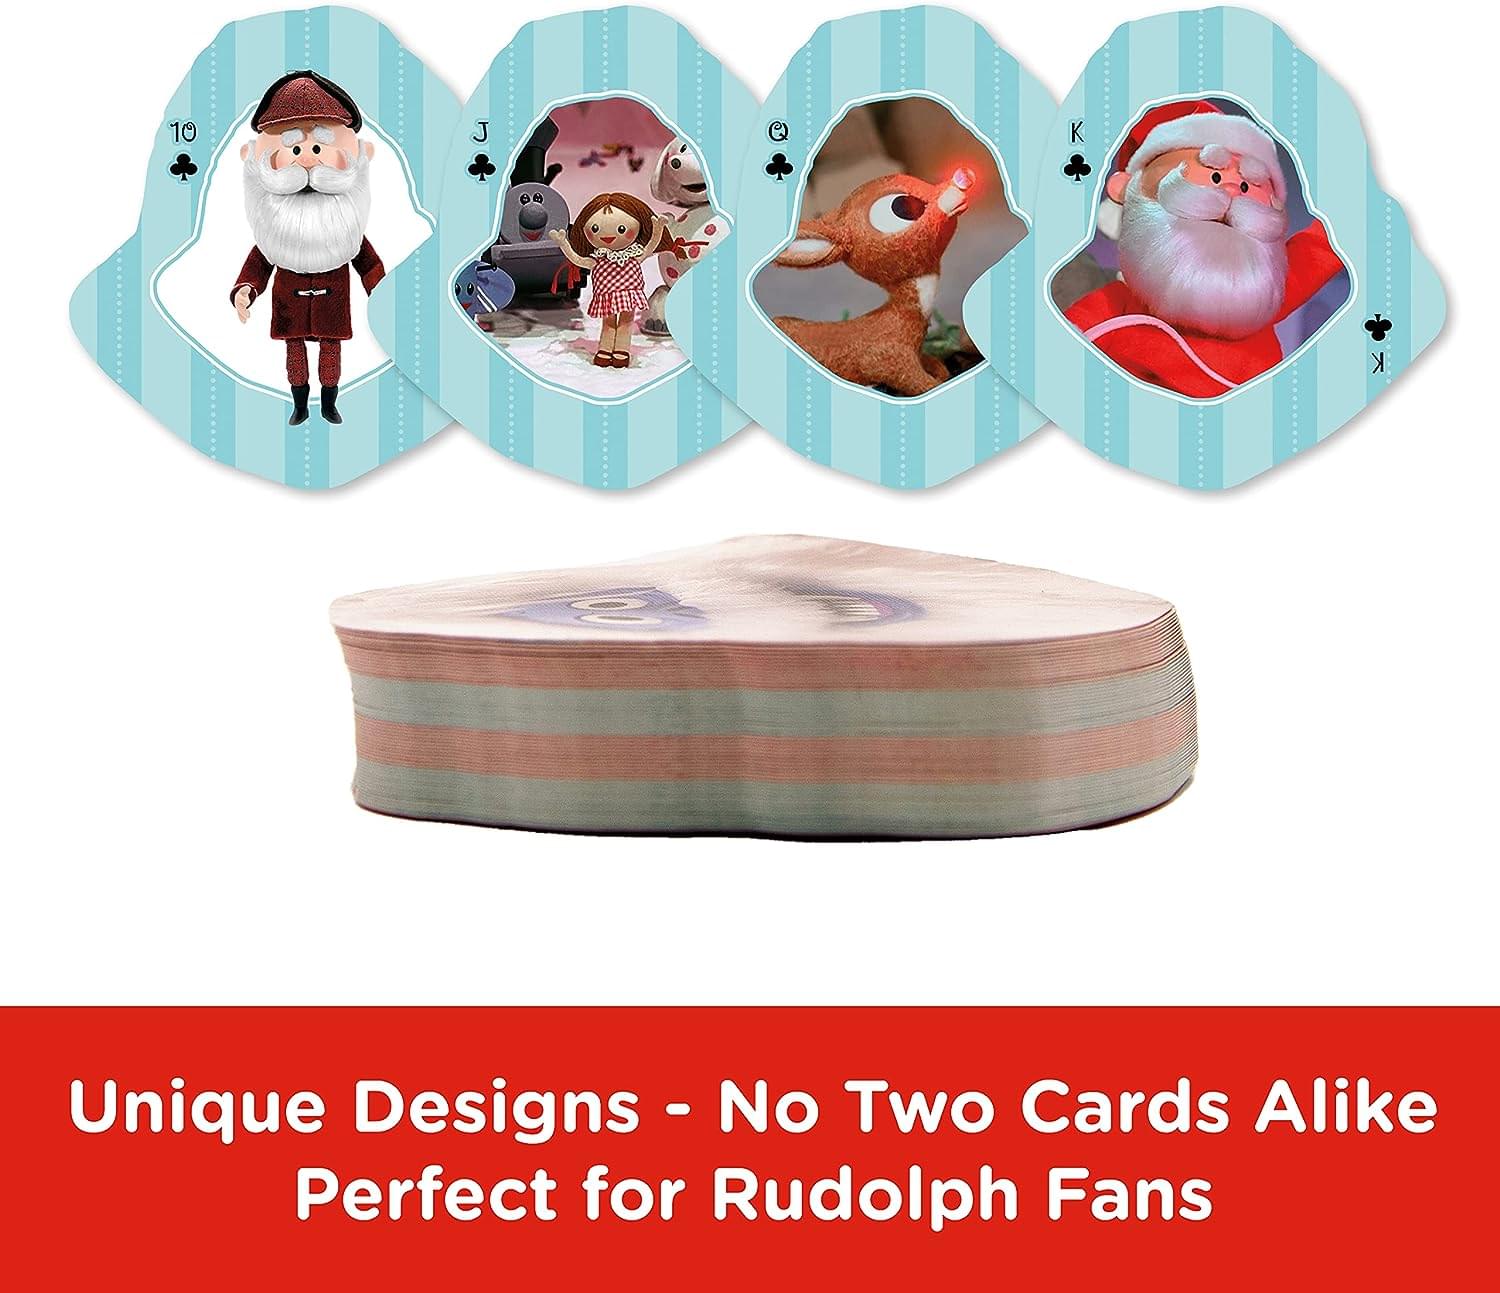 Rudolph the Red-Nosed Reindeer Shaped Playing Cards